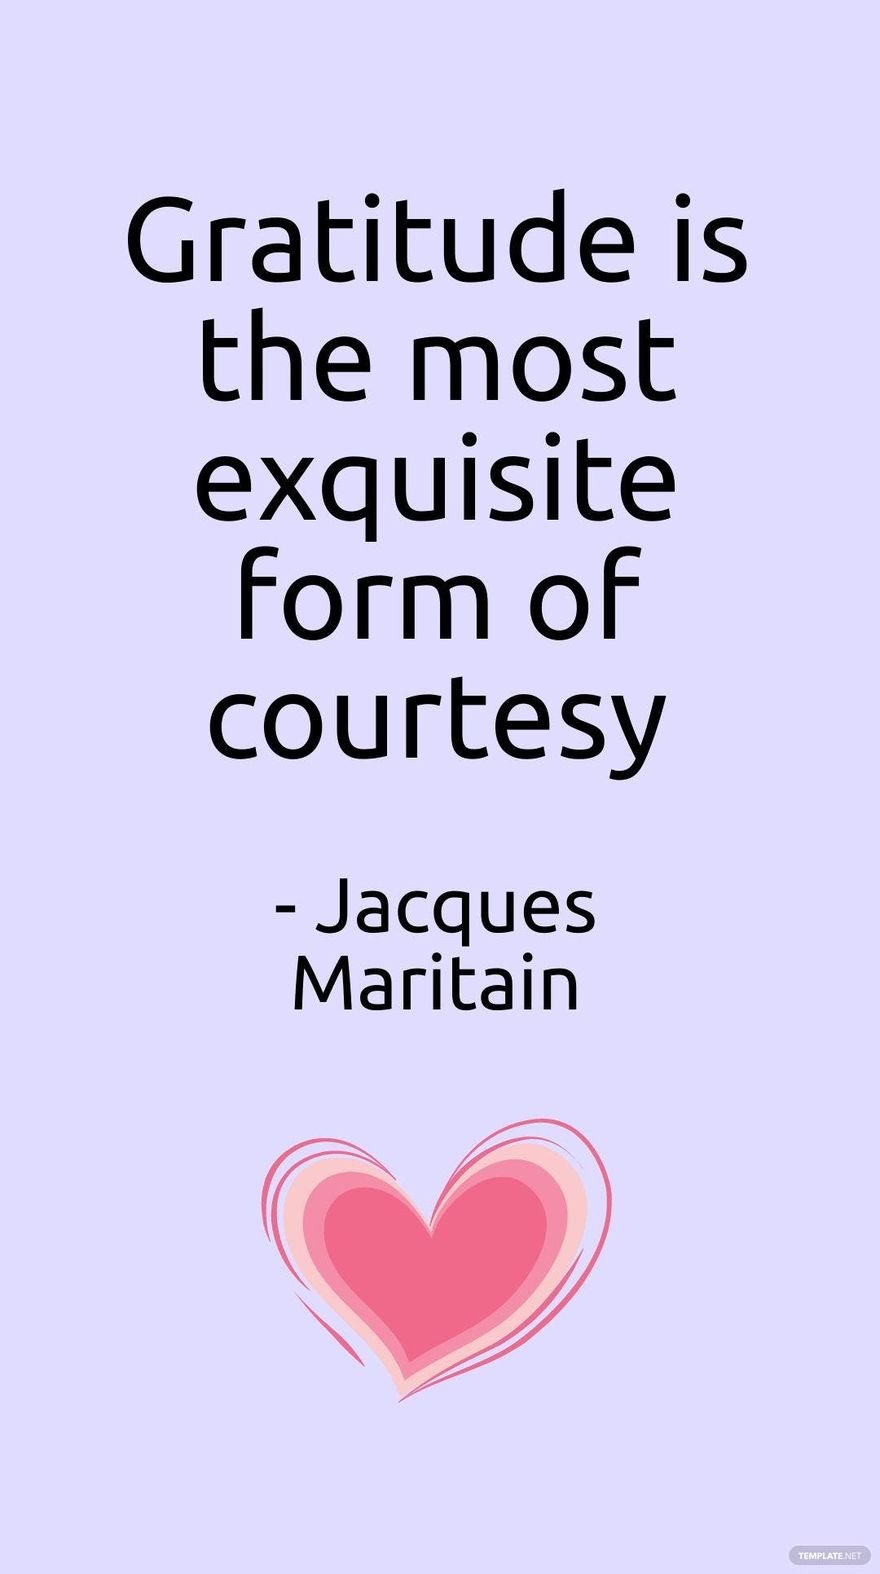 https://images.template.net/109456/jacques-maritain---gratitude-is-the-most-exquisite-form-of-courtesy-hooyk.jpeg